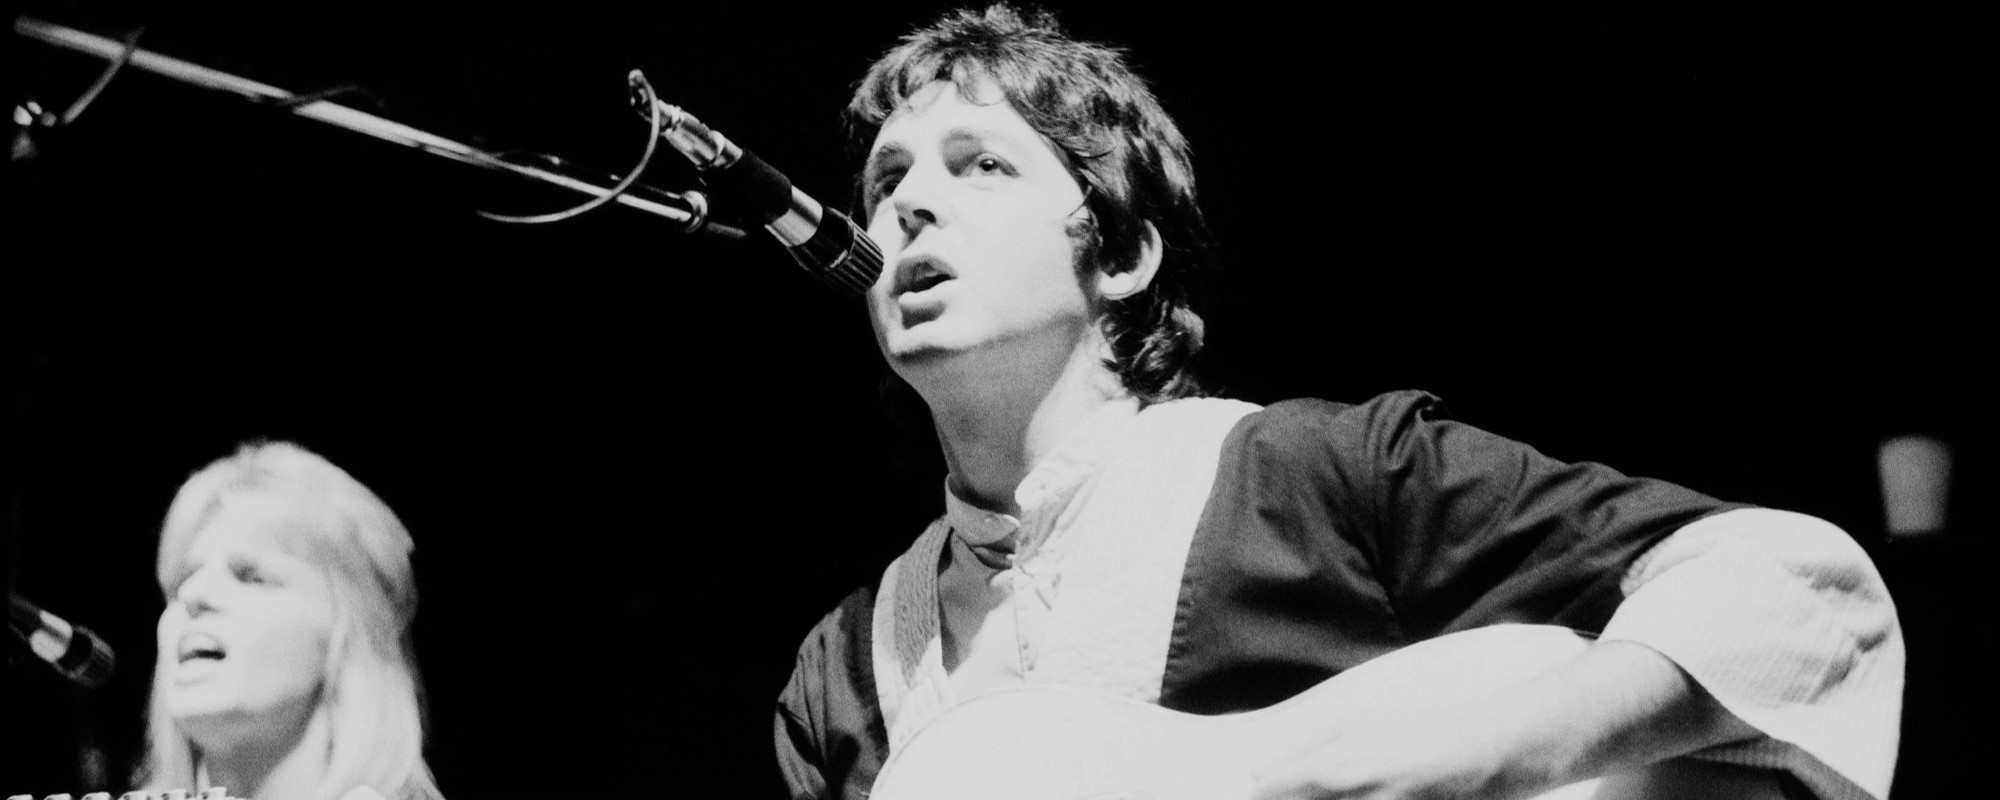 Paul McCartney Shares the Story Behind the Song He Wrote on a Dare from Actor Dustin Hoffman